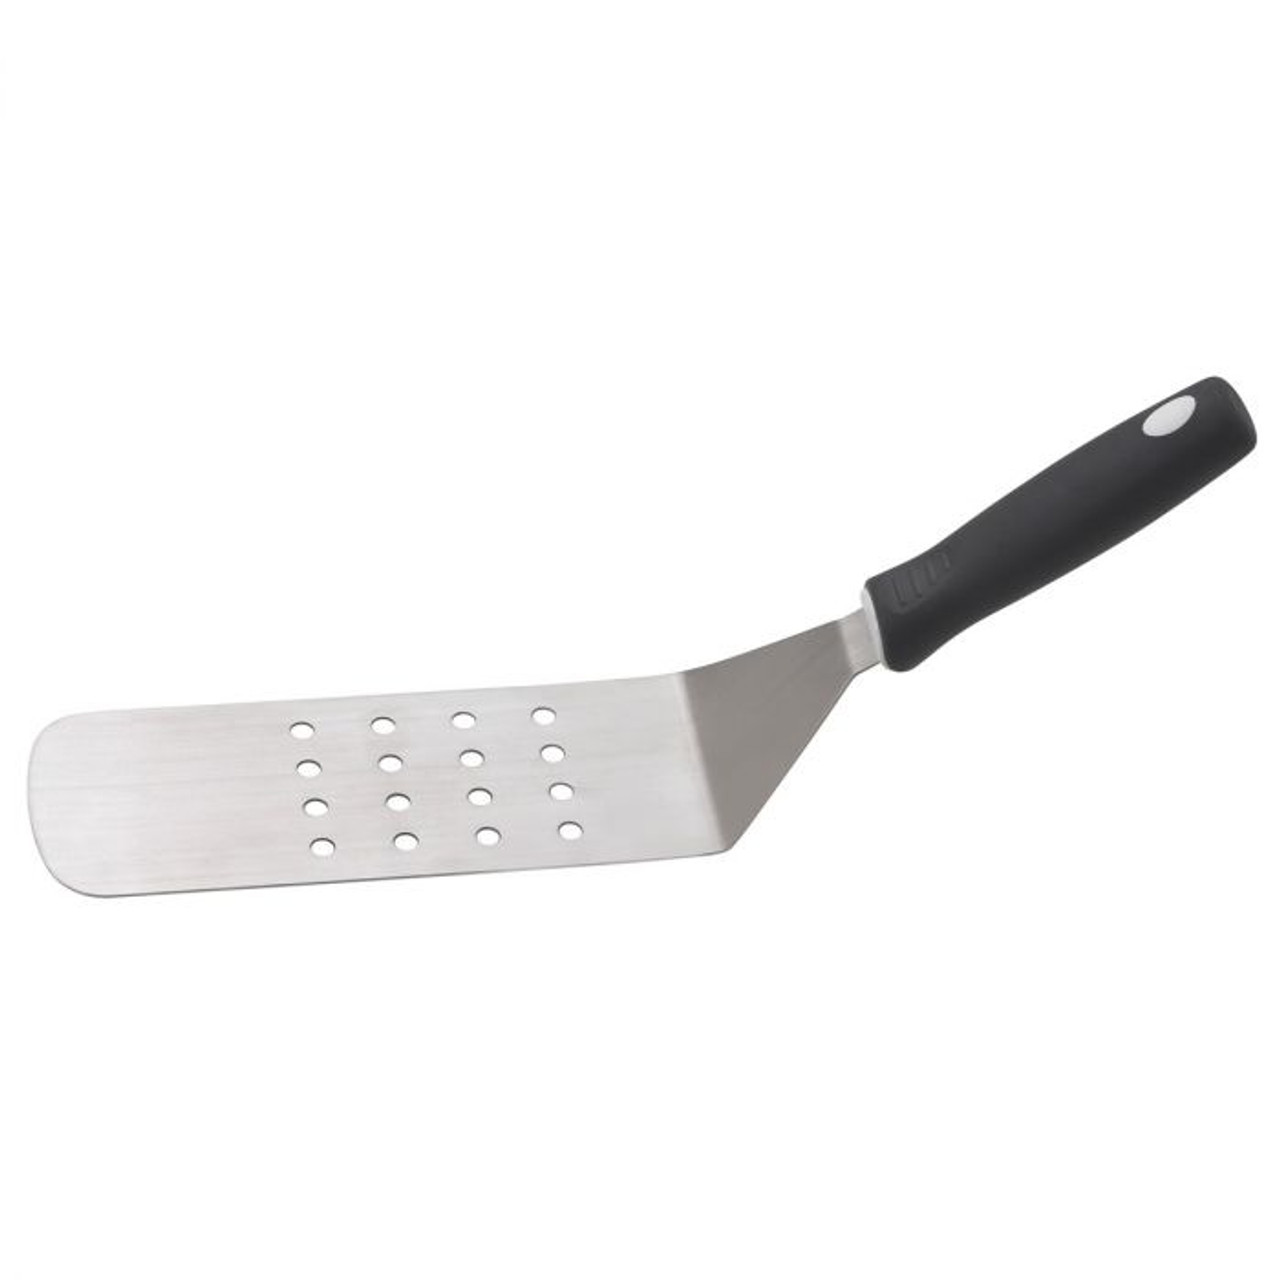 HIC Essentials Stainless Steel Slotted Turner - Fante's Kitchen Shop -  Since 1906